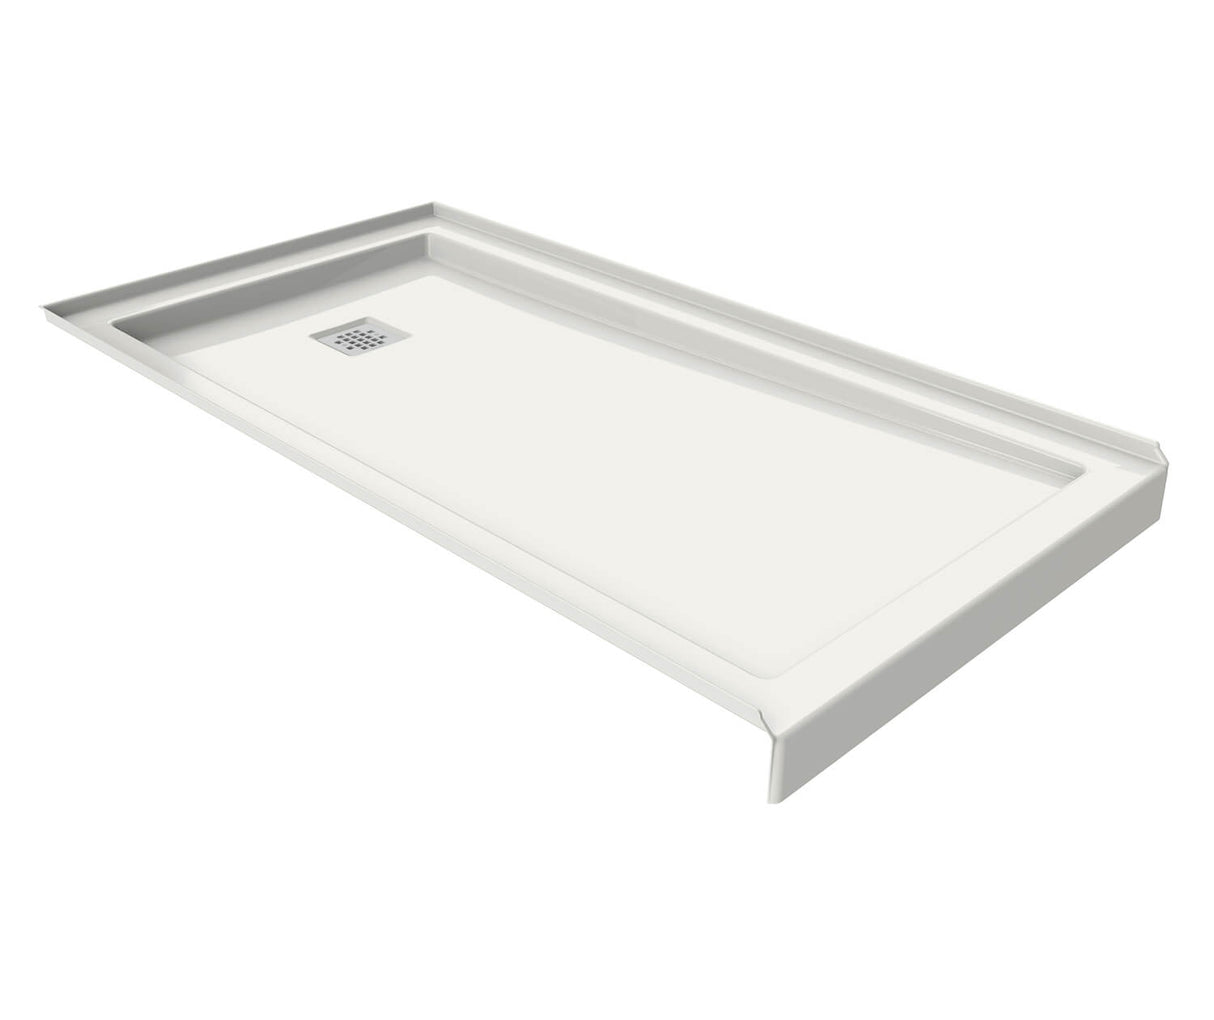 MAAX 420004-504-001-100 B3Square 6030 Acrylic Alcove Deep Shower Base in White with Back End Drain